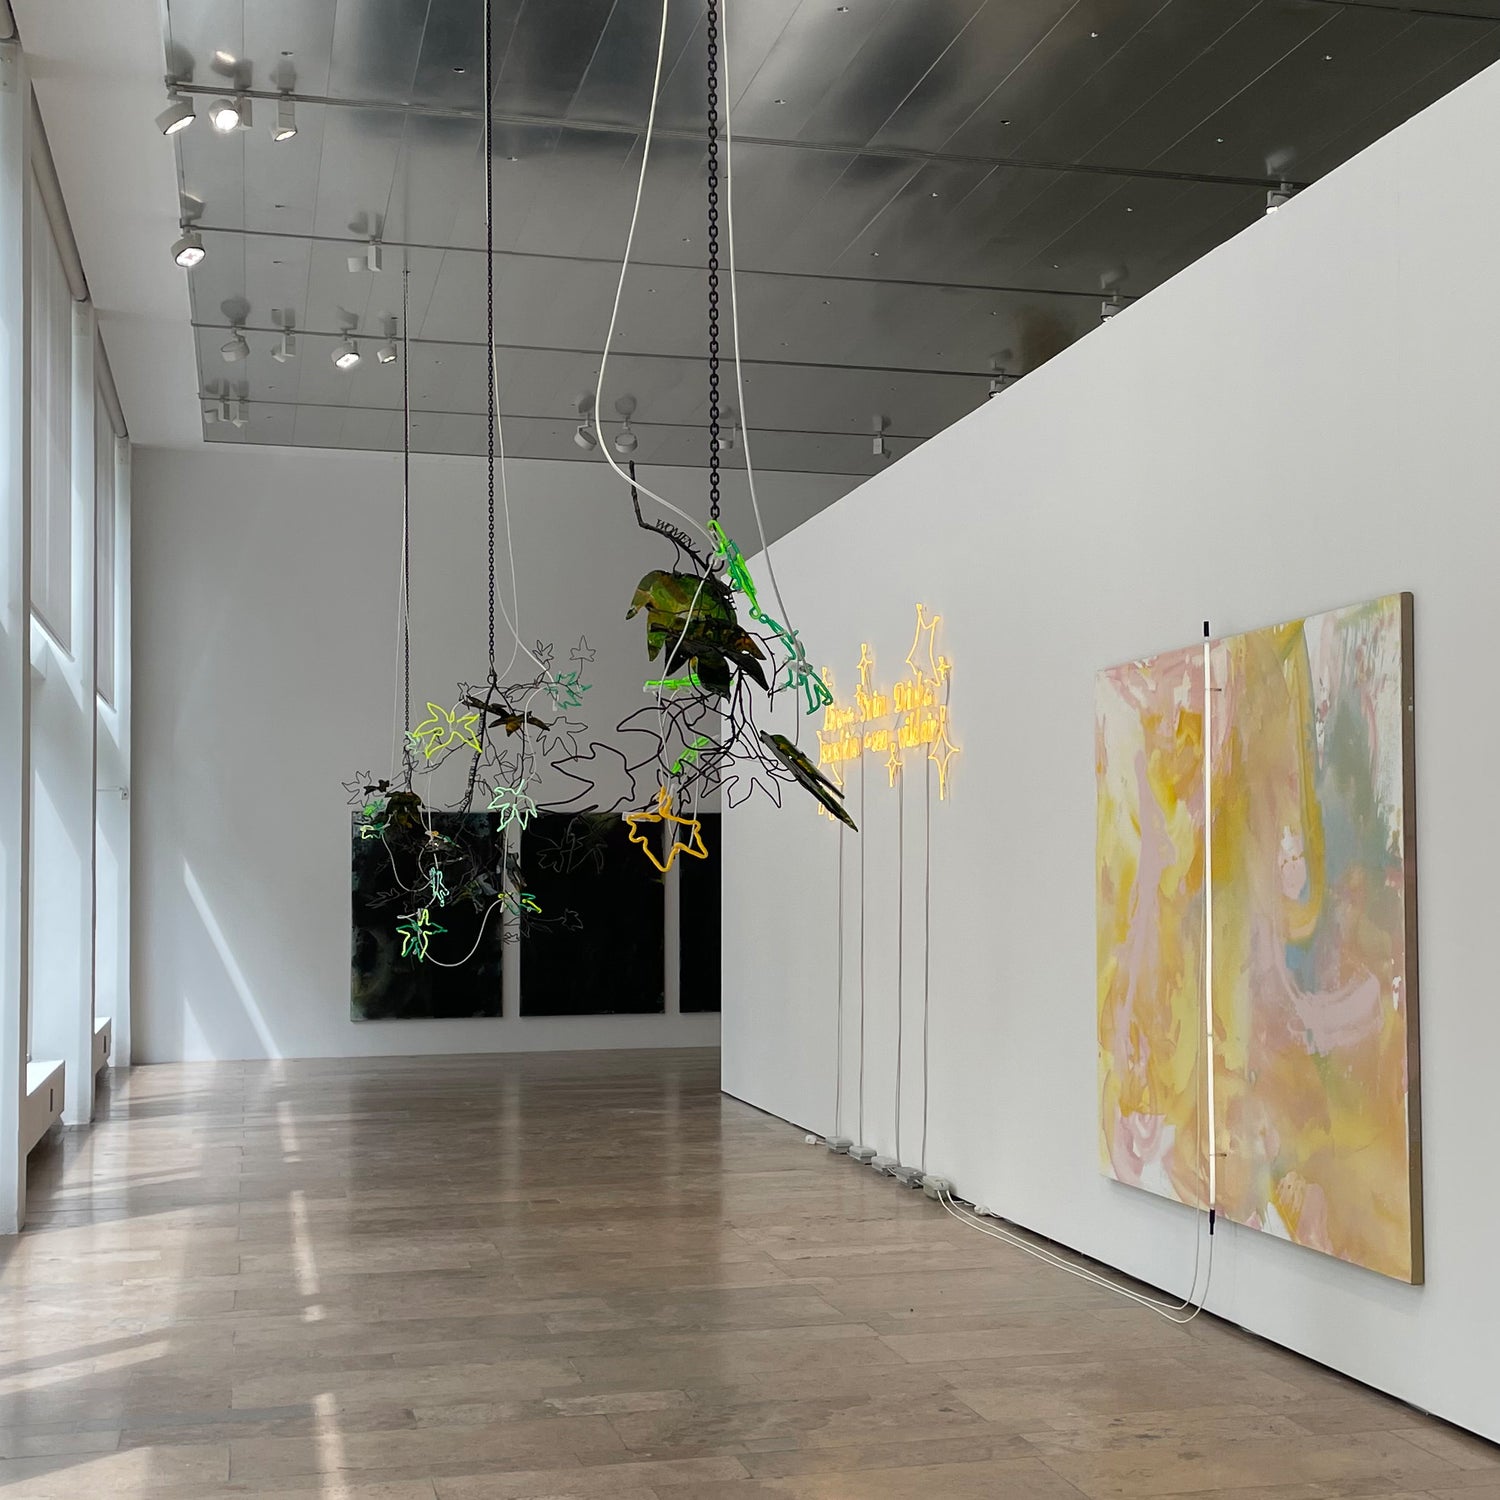 DRINK THE WILD AIR Andrea Bowers and Mary Weatherford at Capitain Petzel Berlin